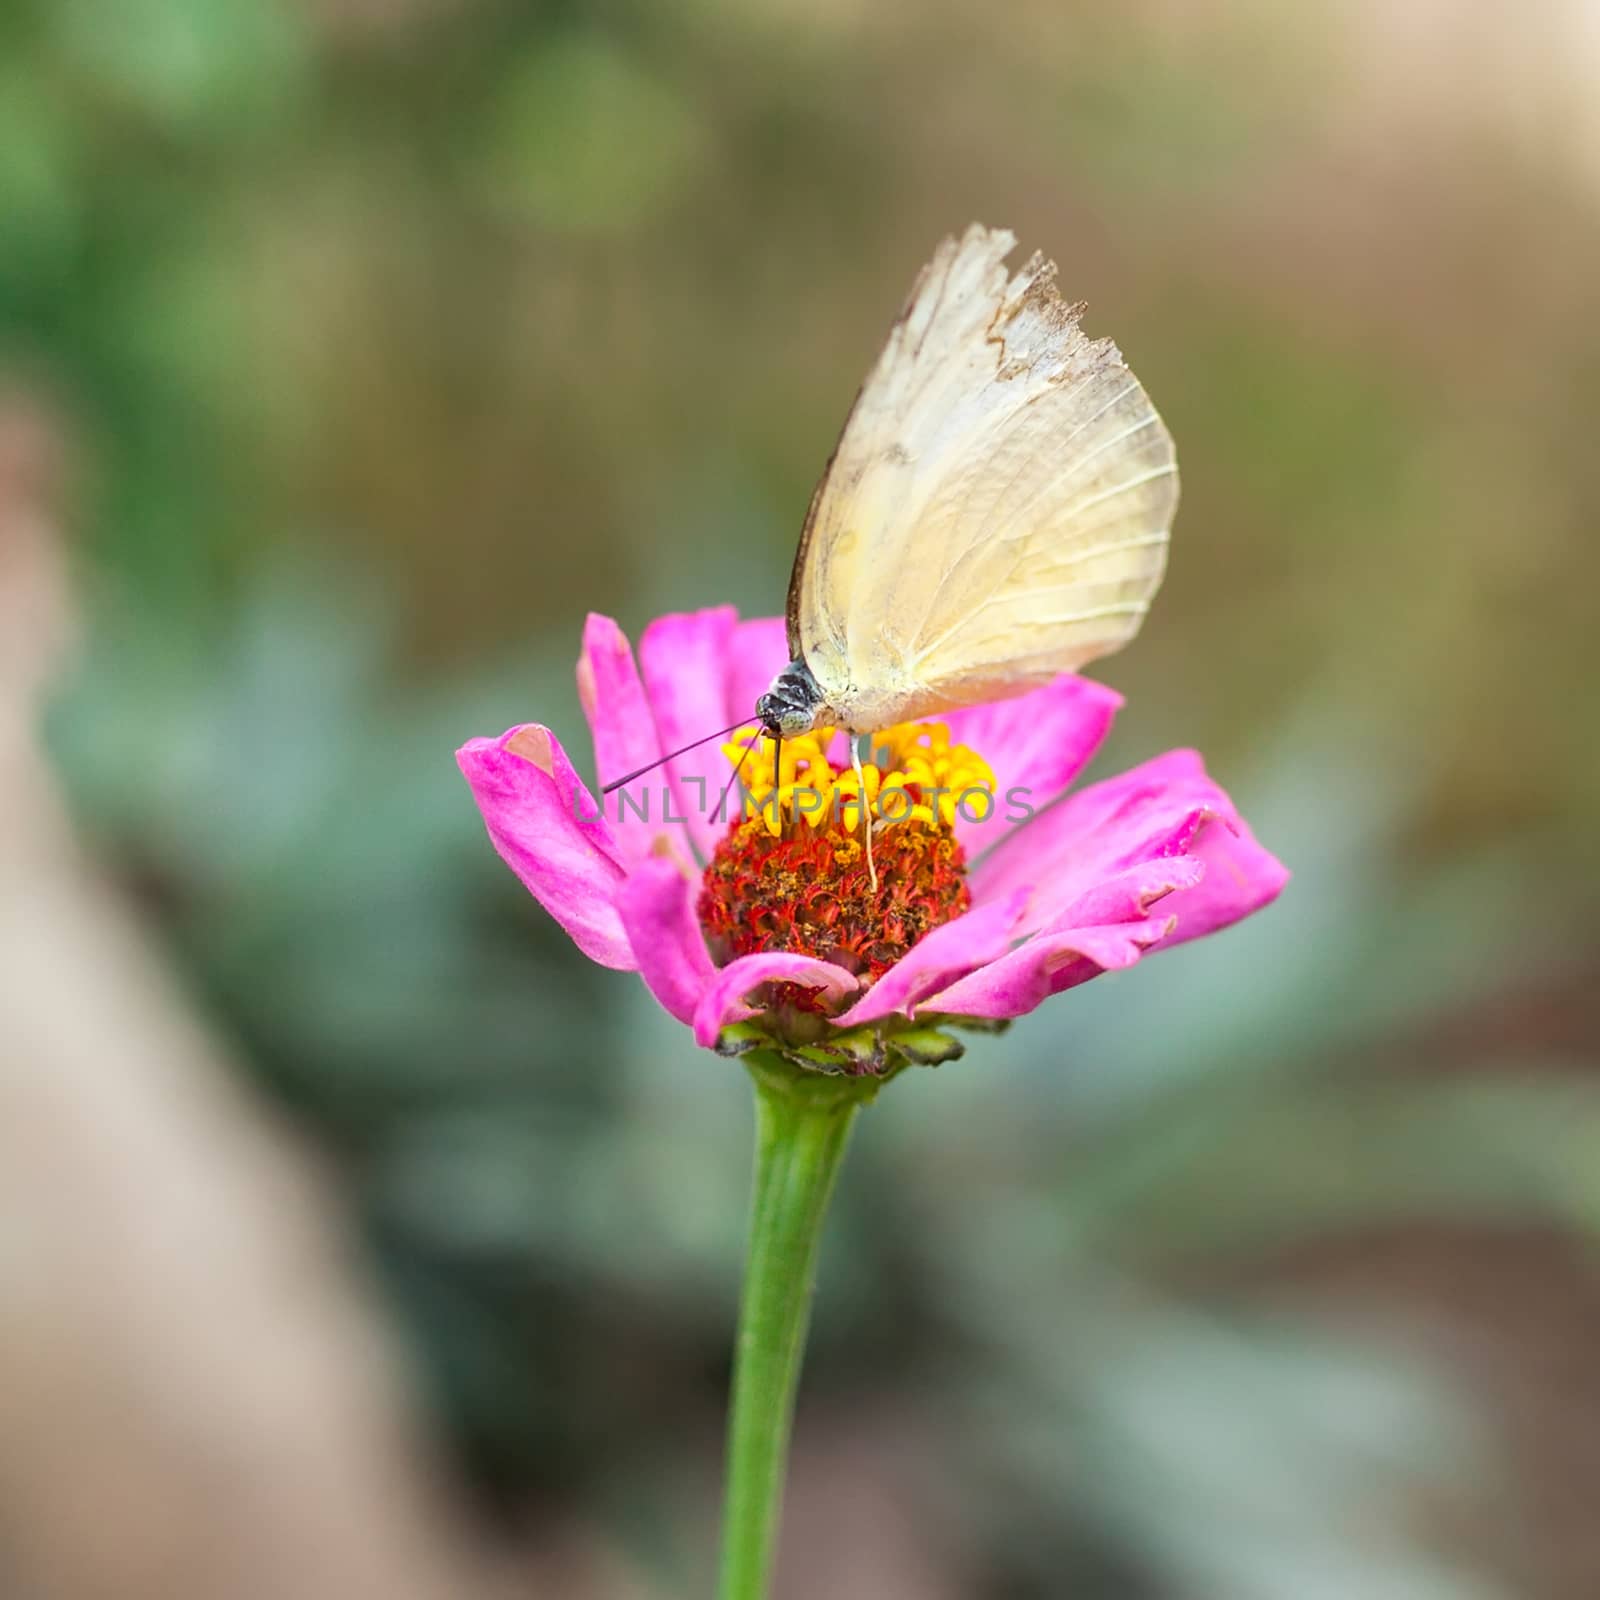 The beautiful butterfly on hand at Chiang Mai National Park, Thailand (Taken from distance and selective focus point)